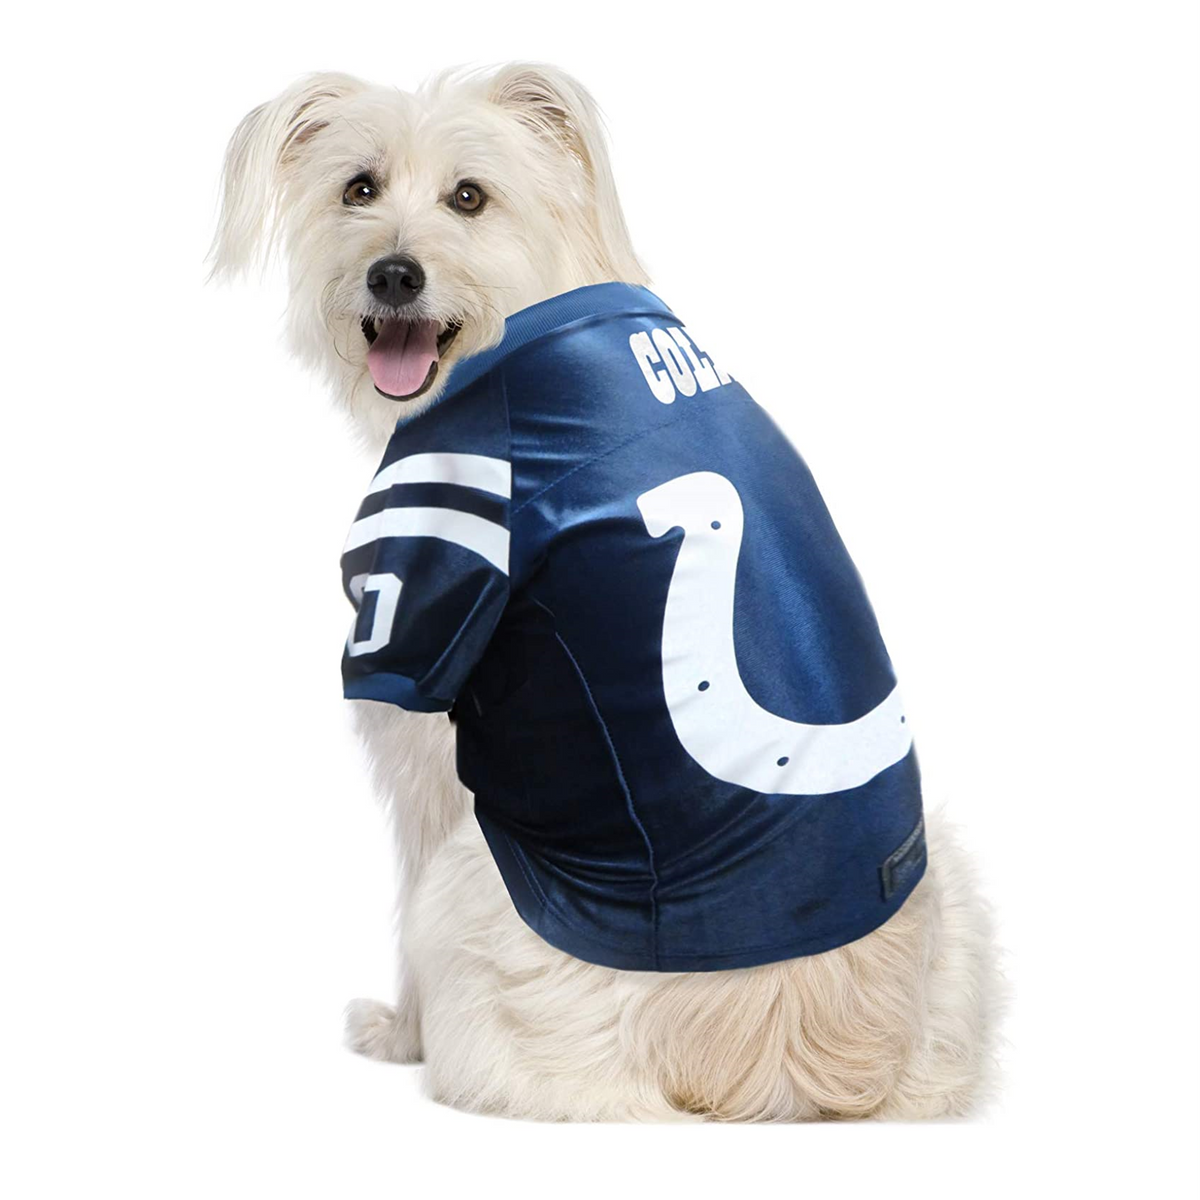 indianapolis colts dog jersey